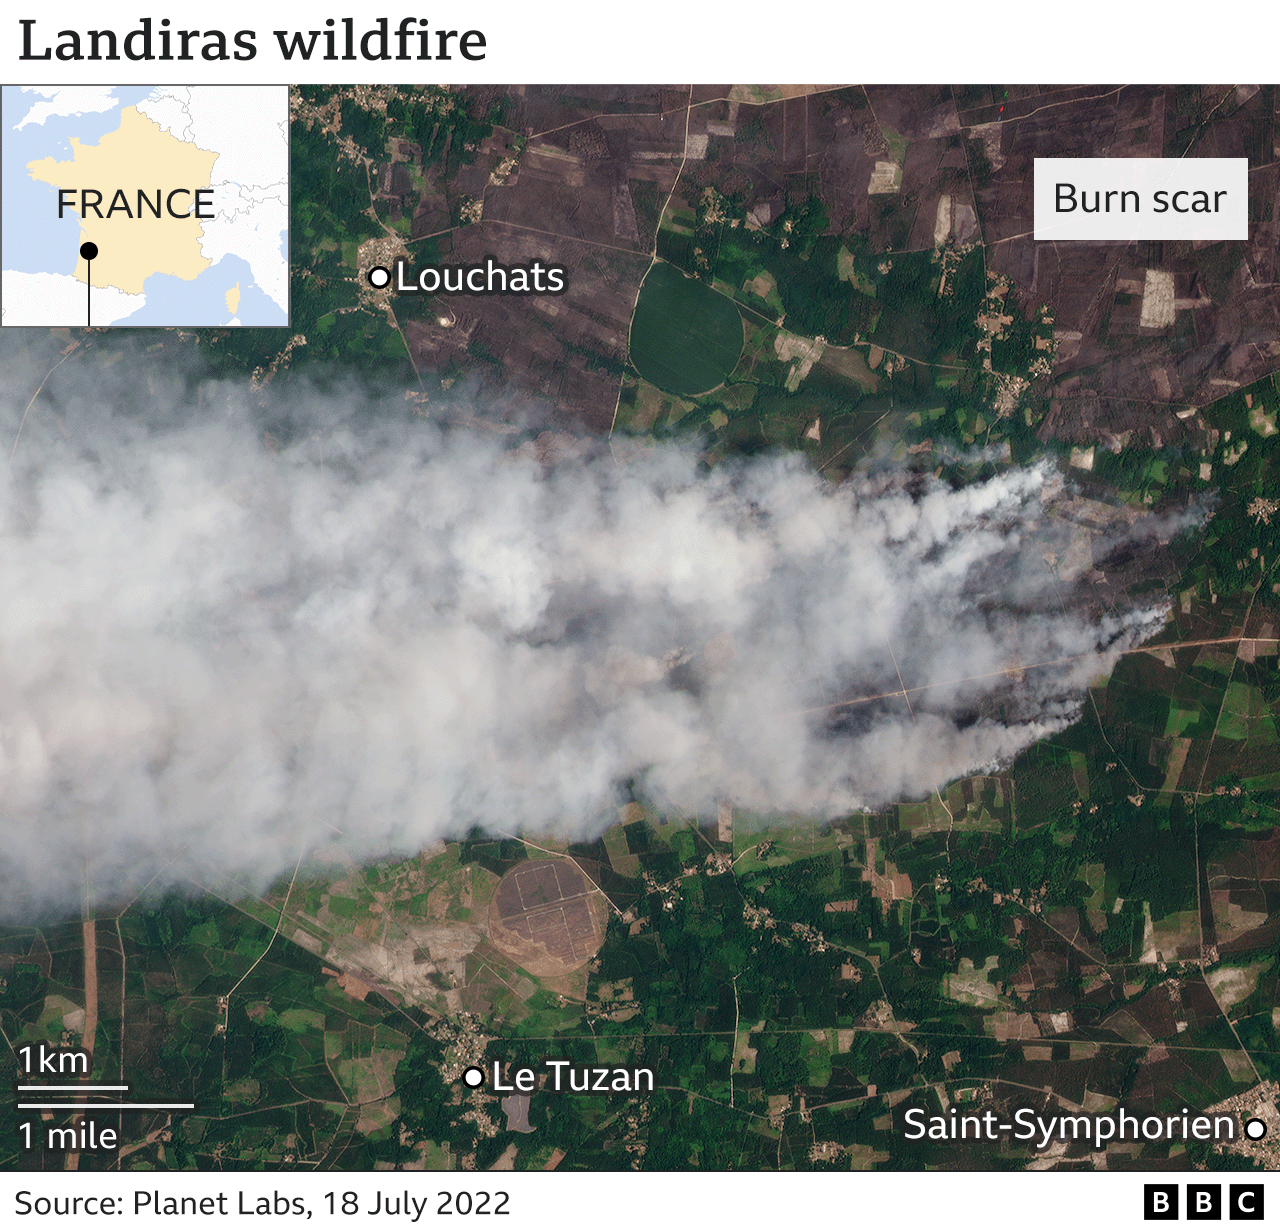 Satellite view of a wildfire near Landiras, France on 18 July 2022. Photo: Planet Labs / BBC News